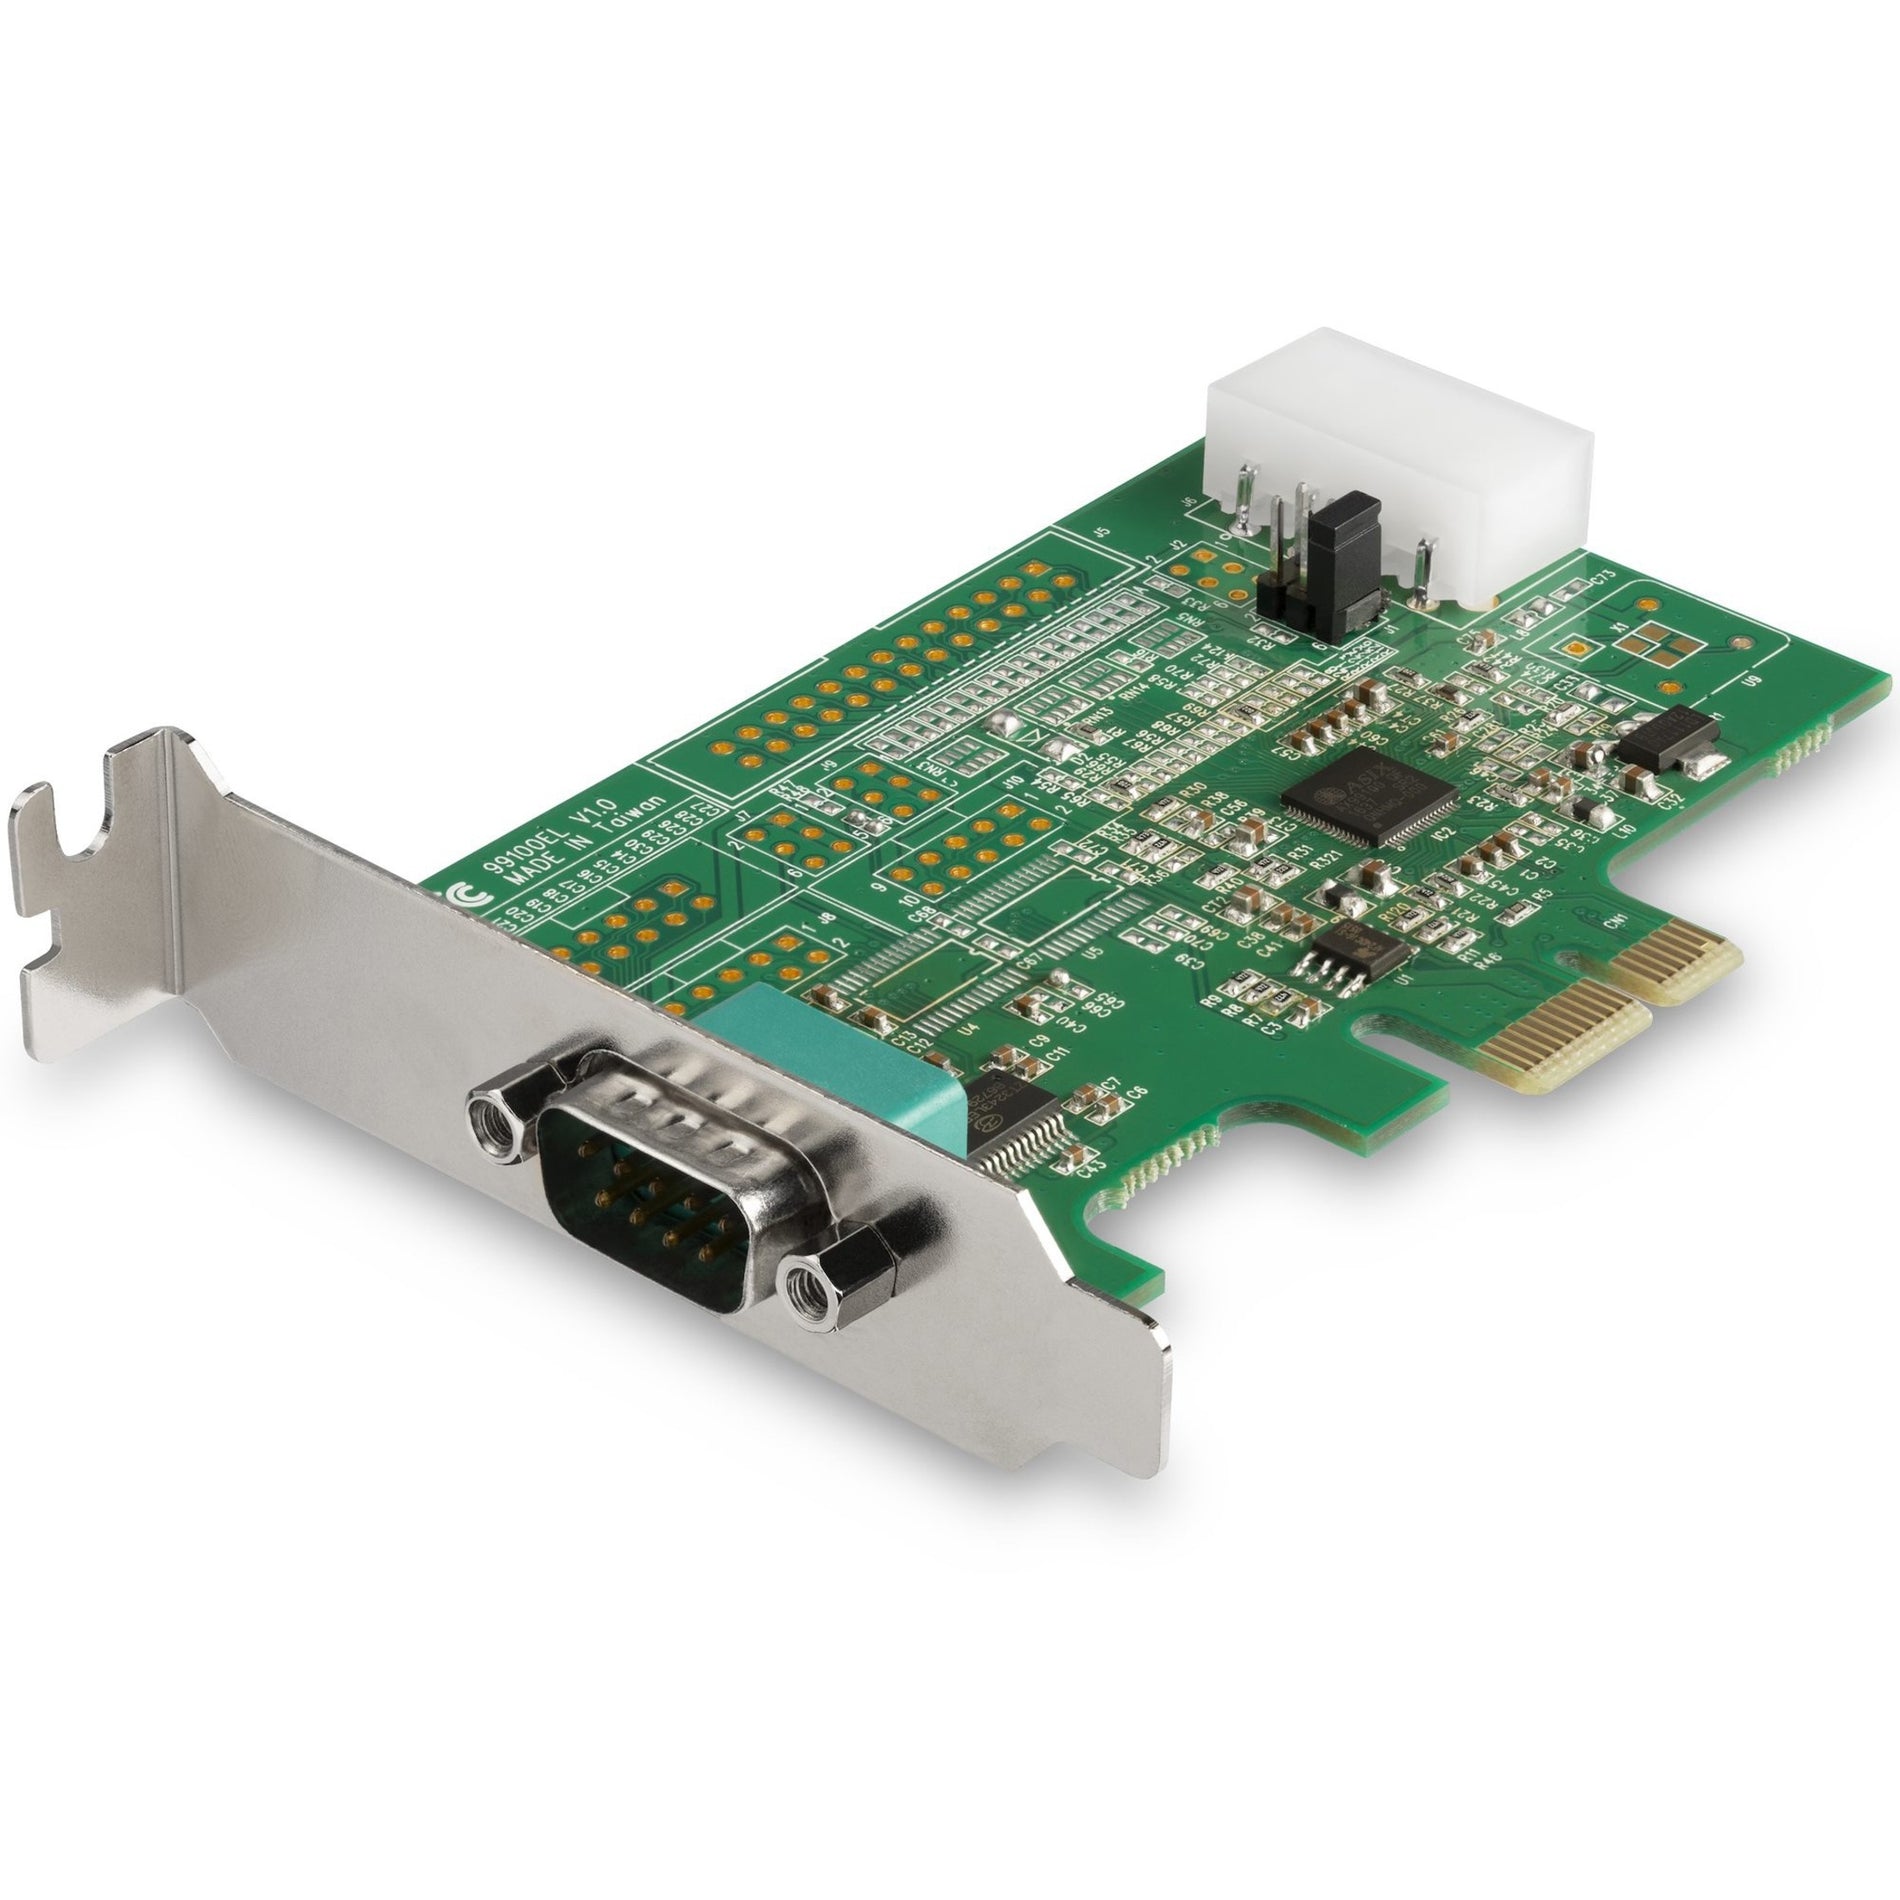 StarTech.com PEX1S953LP 1-Port PCI Express Serial Card with 16950 UART - Low-Profile, Serial/Parallel Adapter